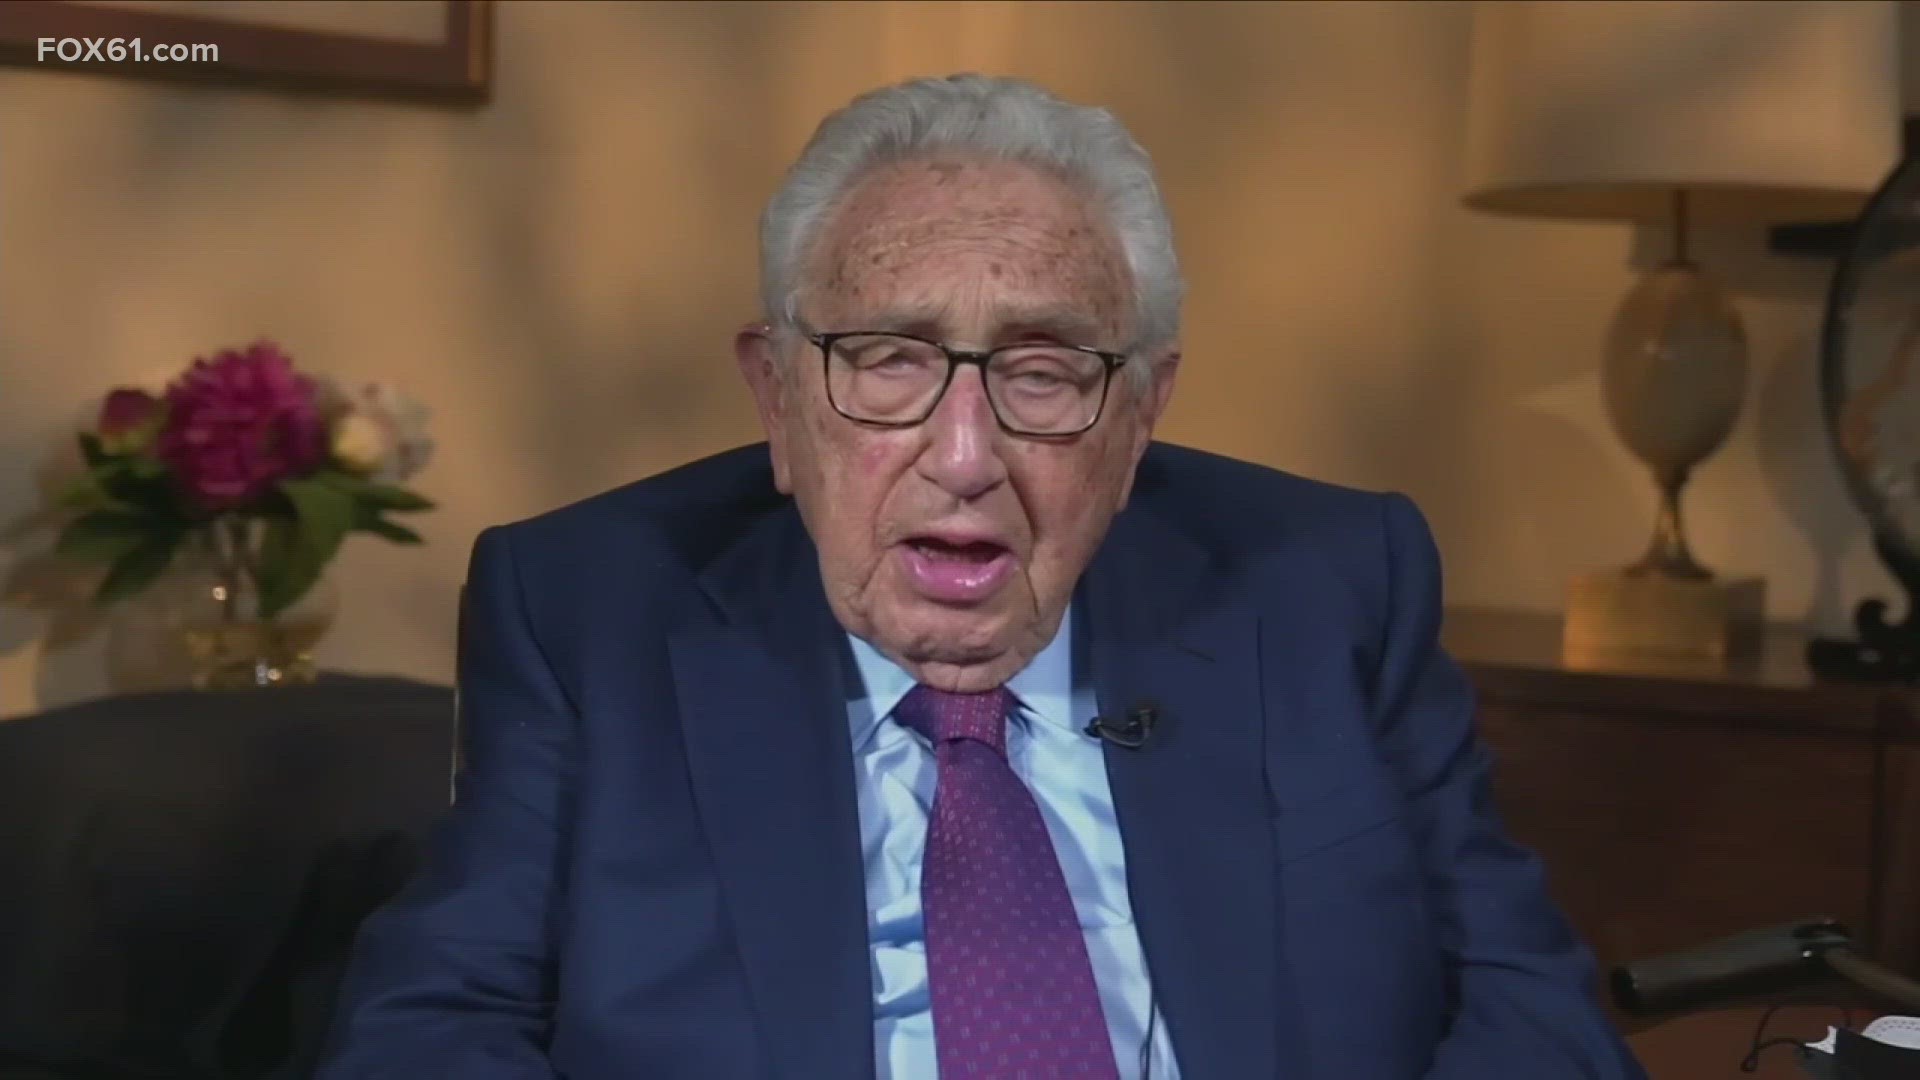 Kissinger stands among the 20th century’s most commanding figures in U.S. foreign policy.